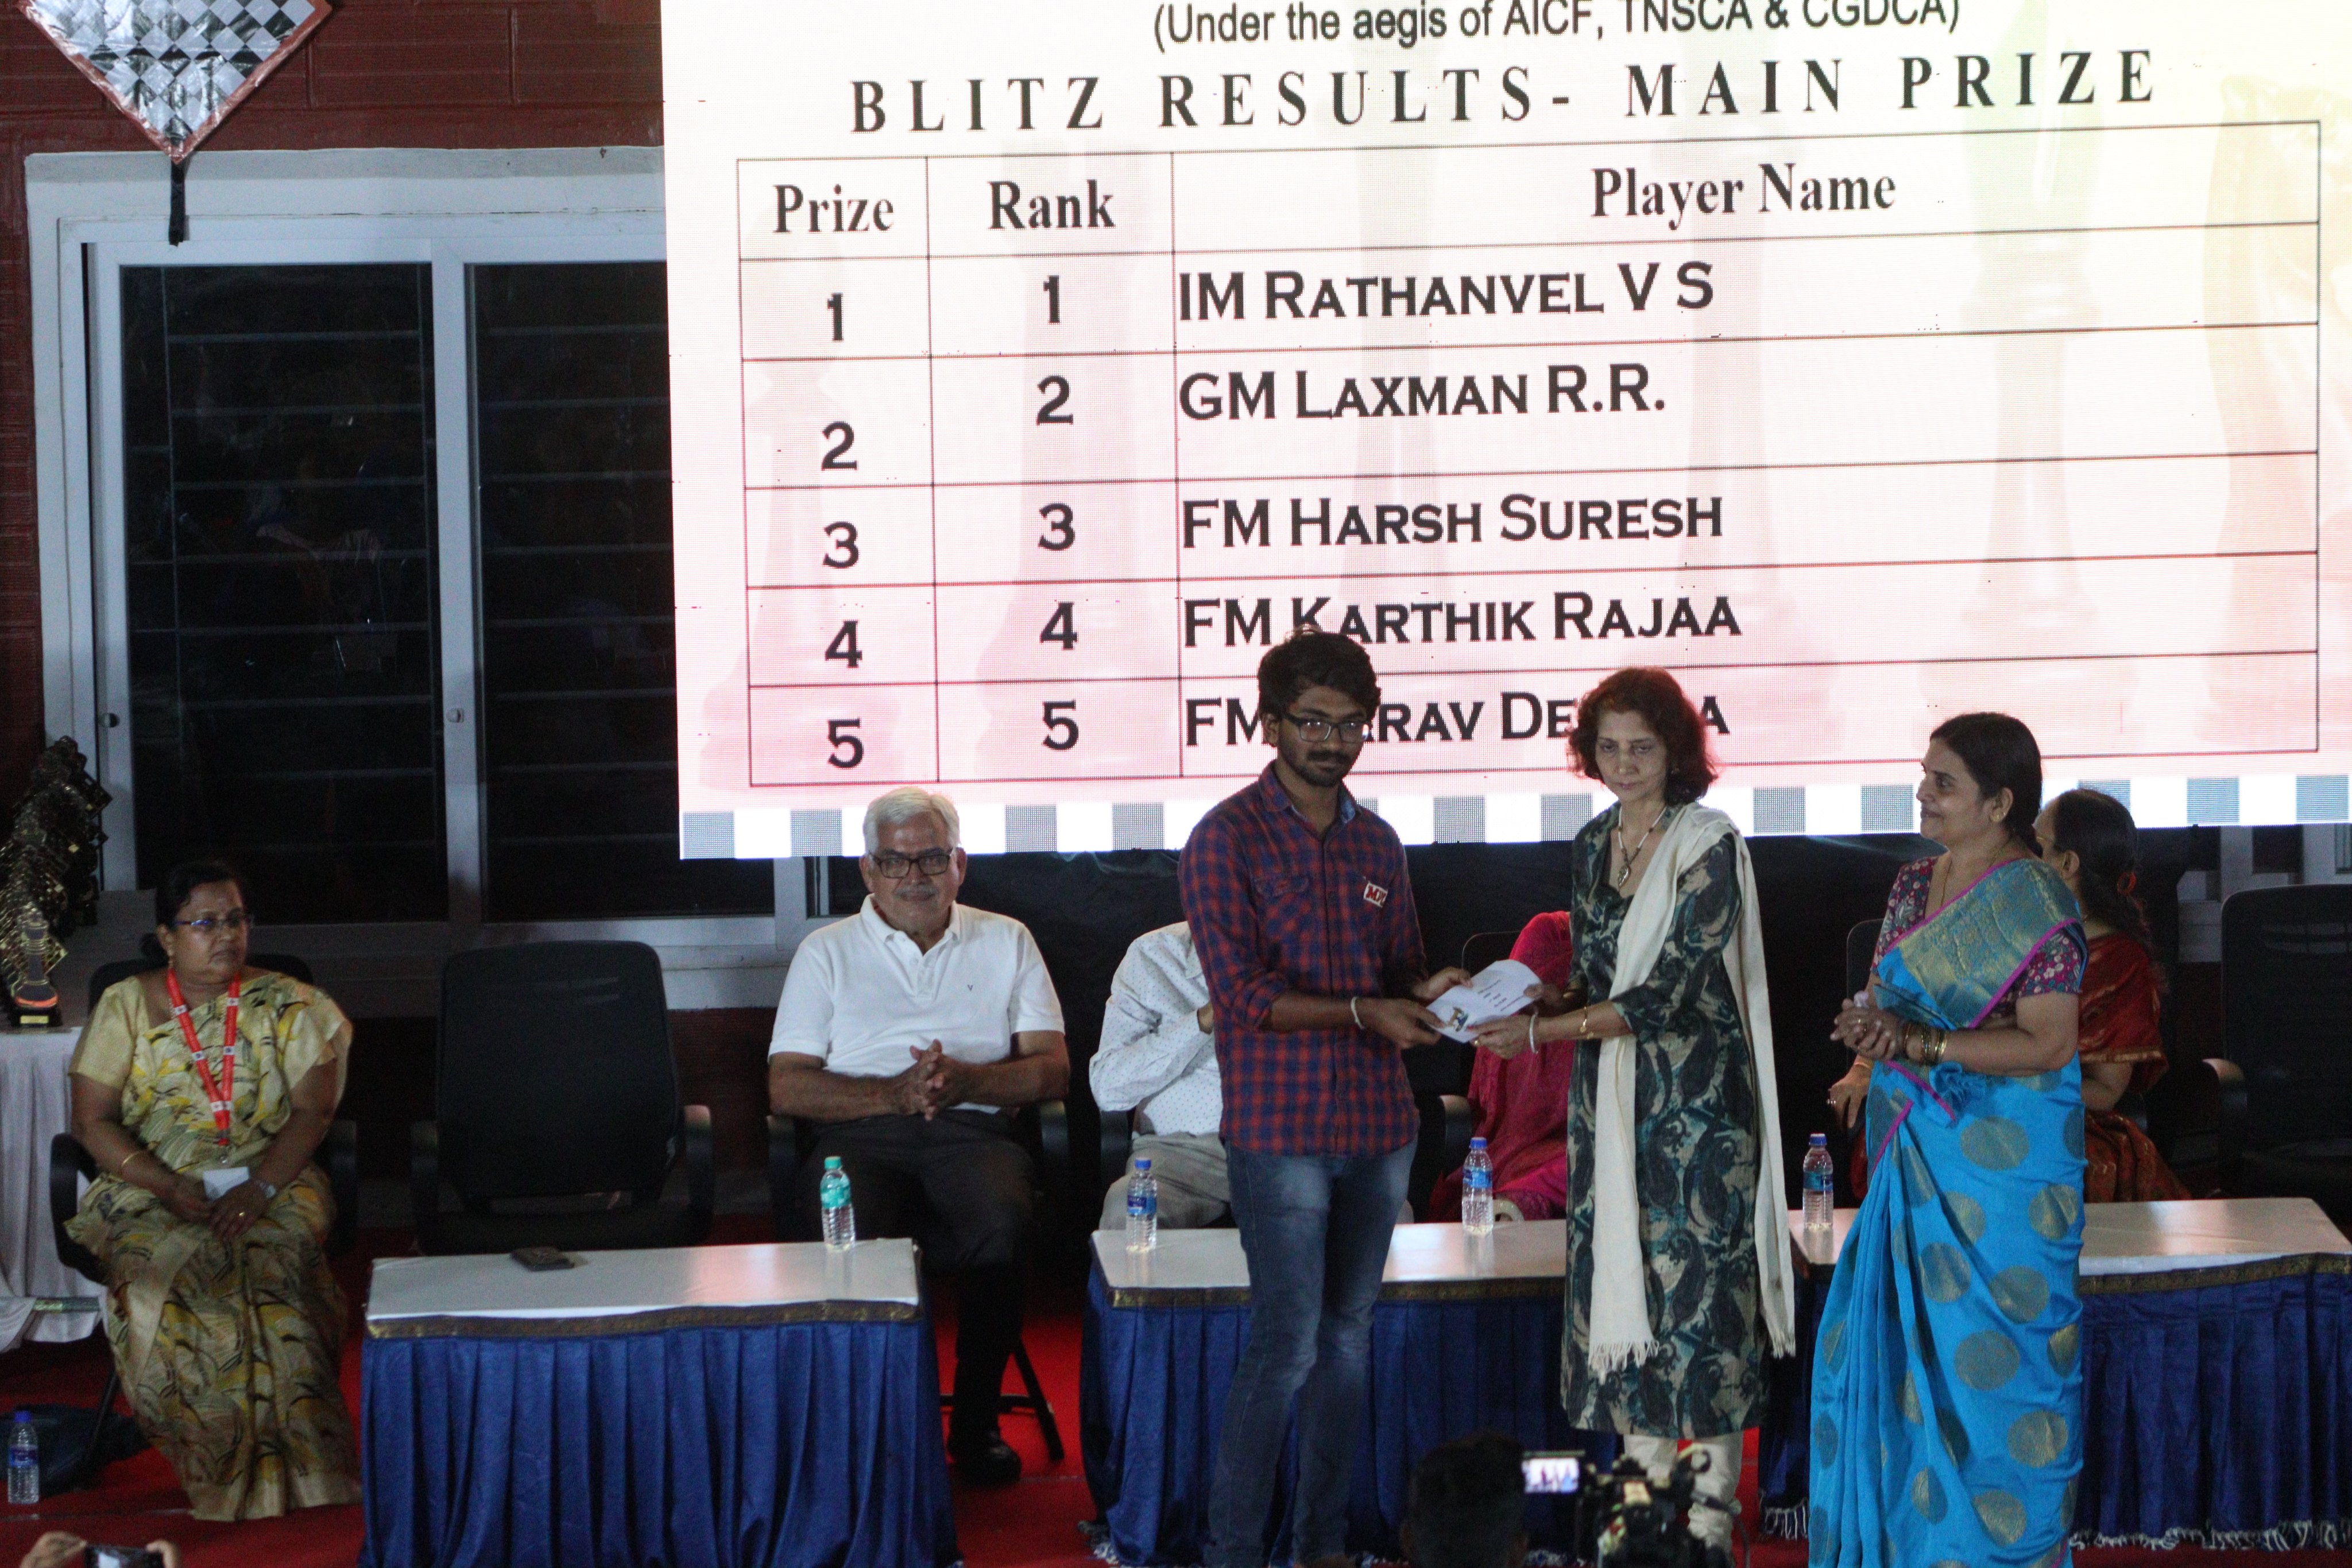 D.A.V. Groups of Schools, Chennai hosted the 'International FIDE